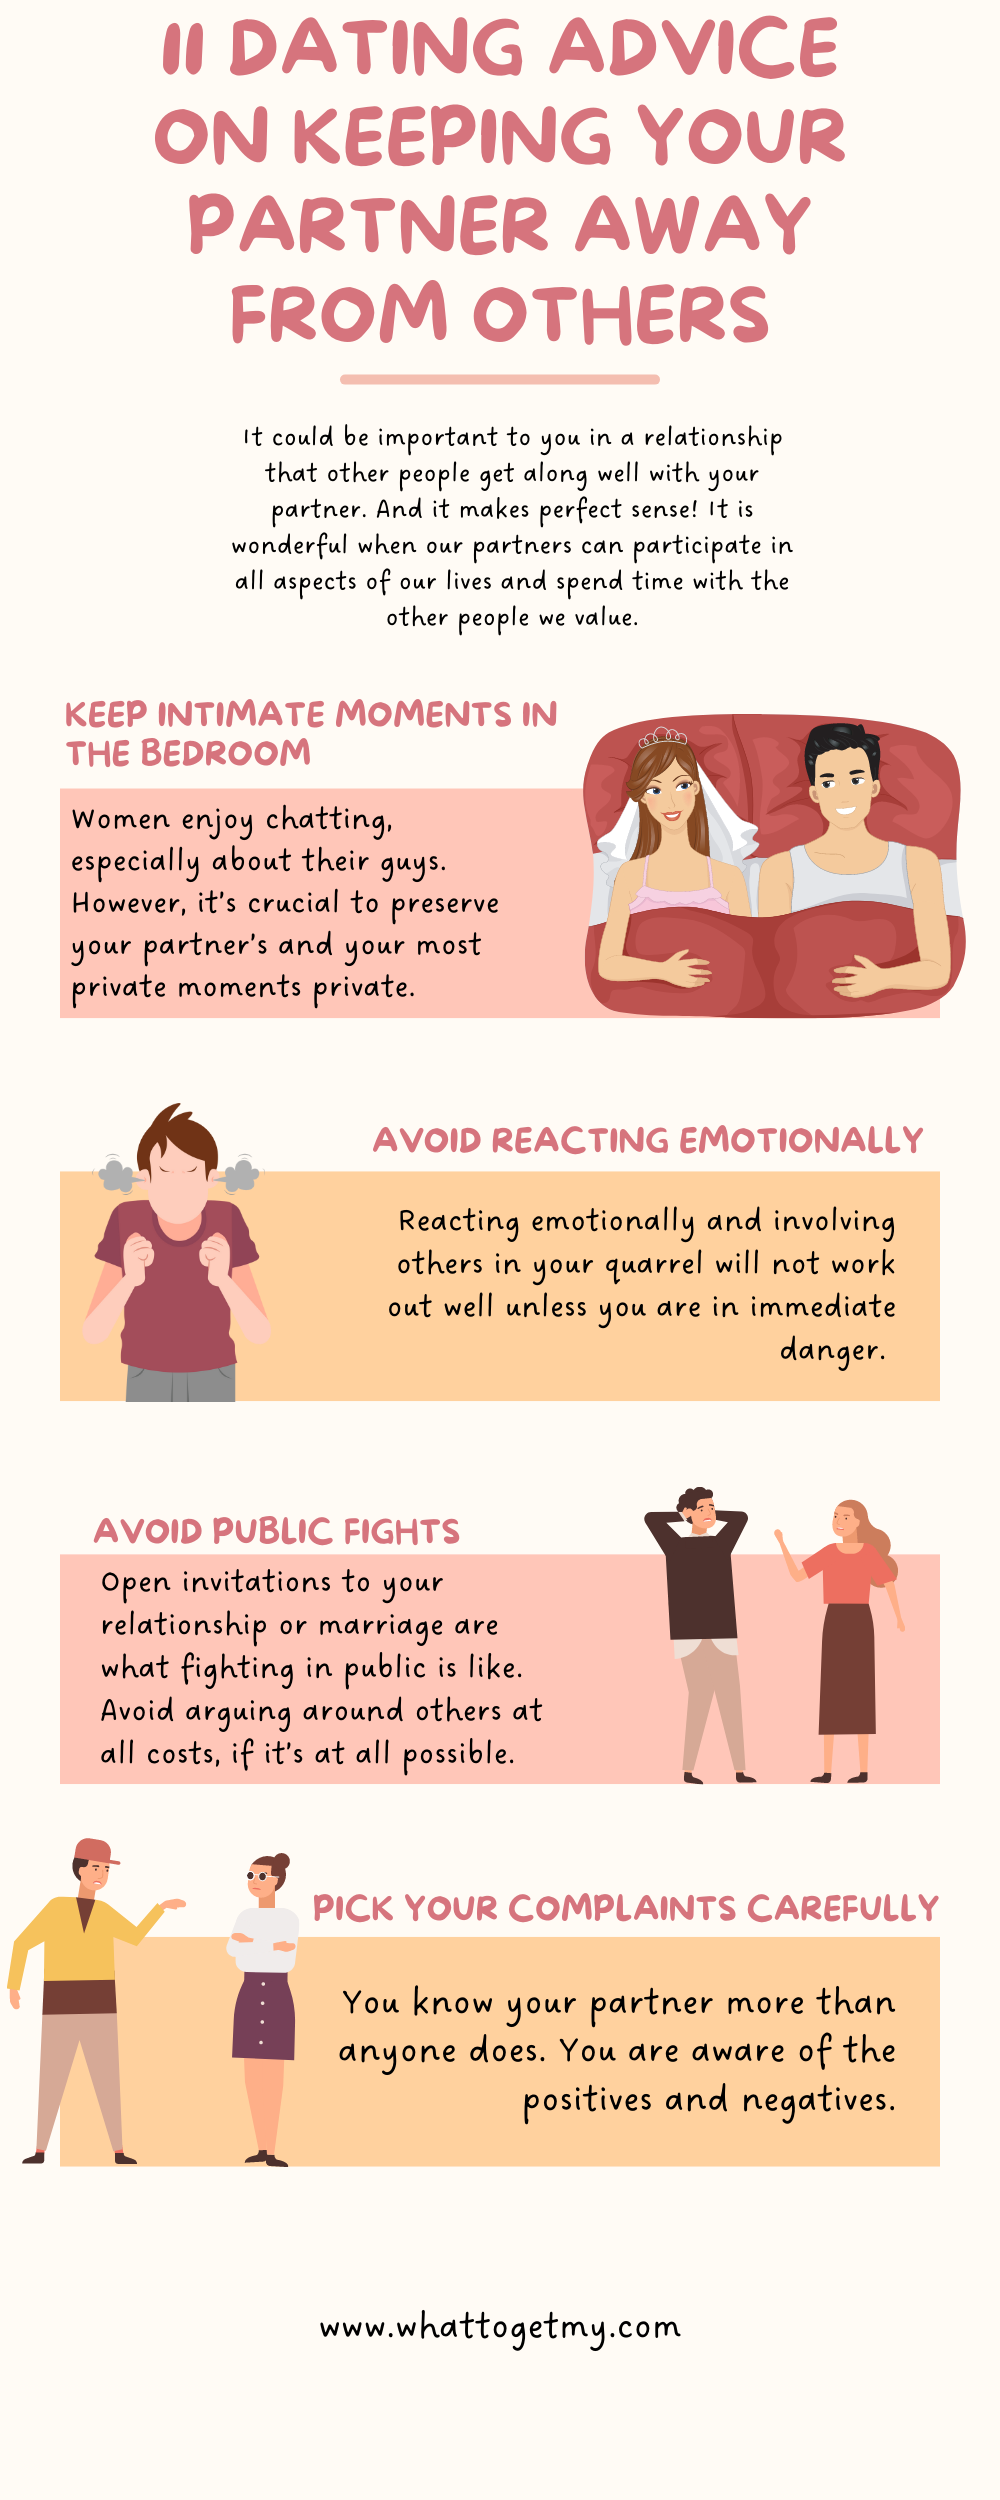 11 DATING ADVICE ON KEEPING YOUR PARTNER AWAY FROM OTHERS